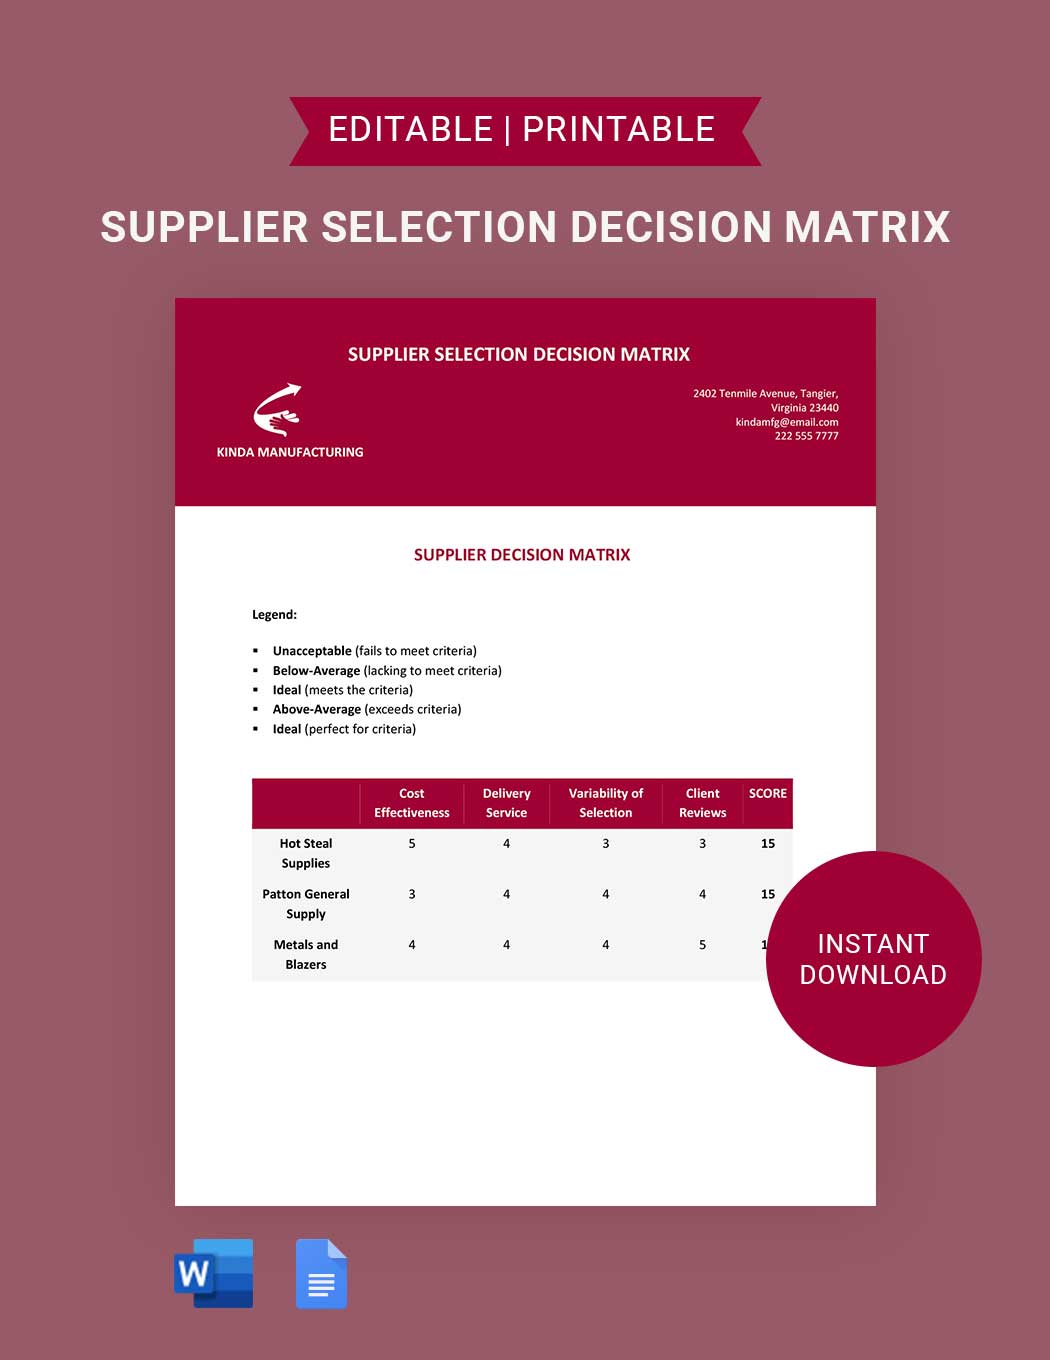 Supplier Selection Decision Matrix Template in Word, Google Docs